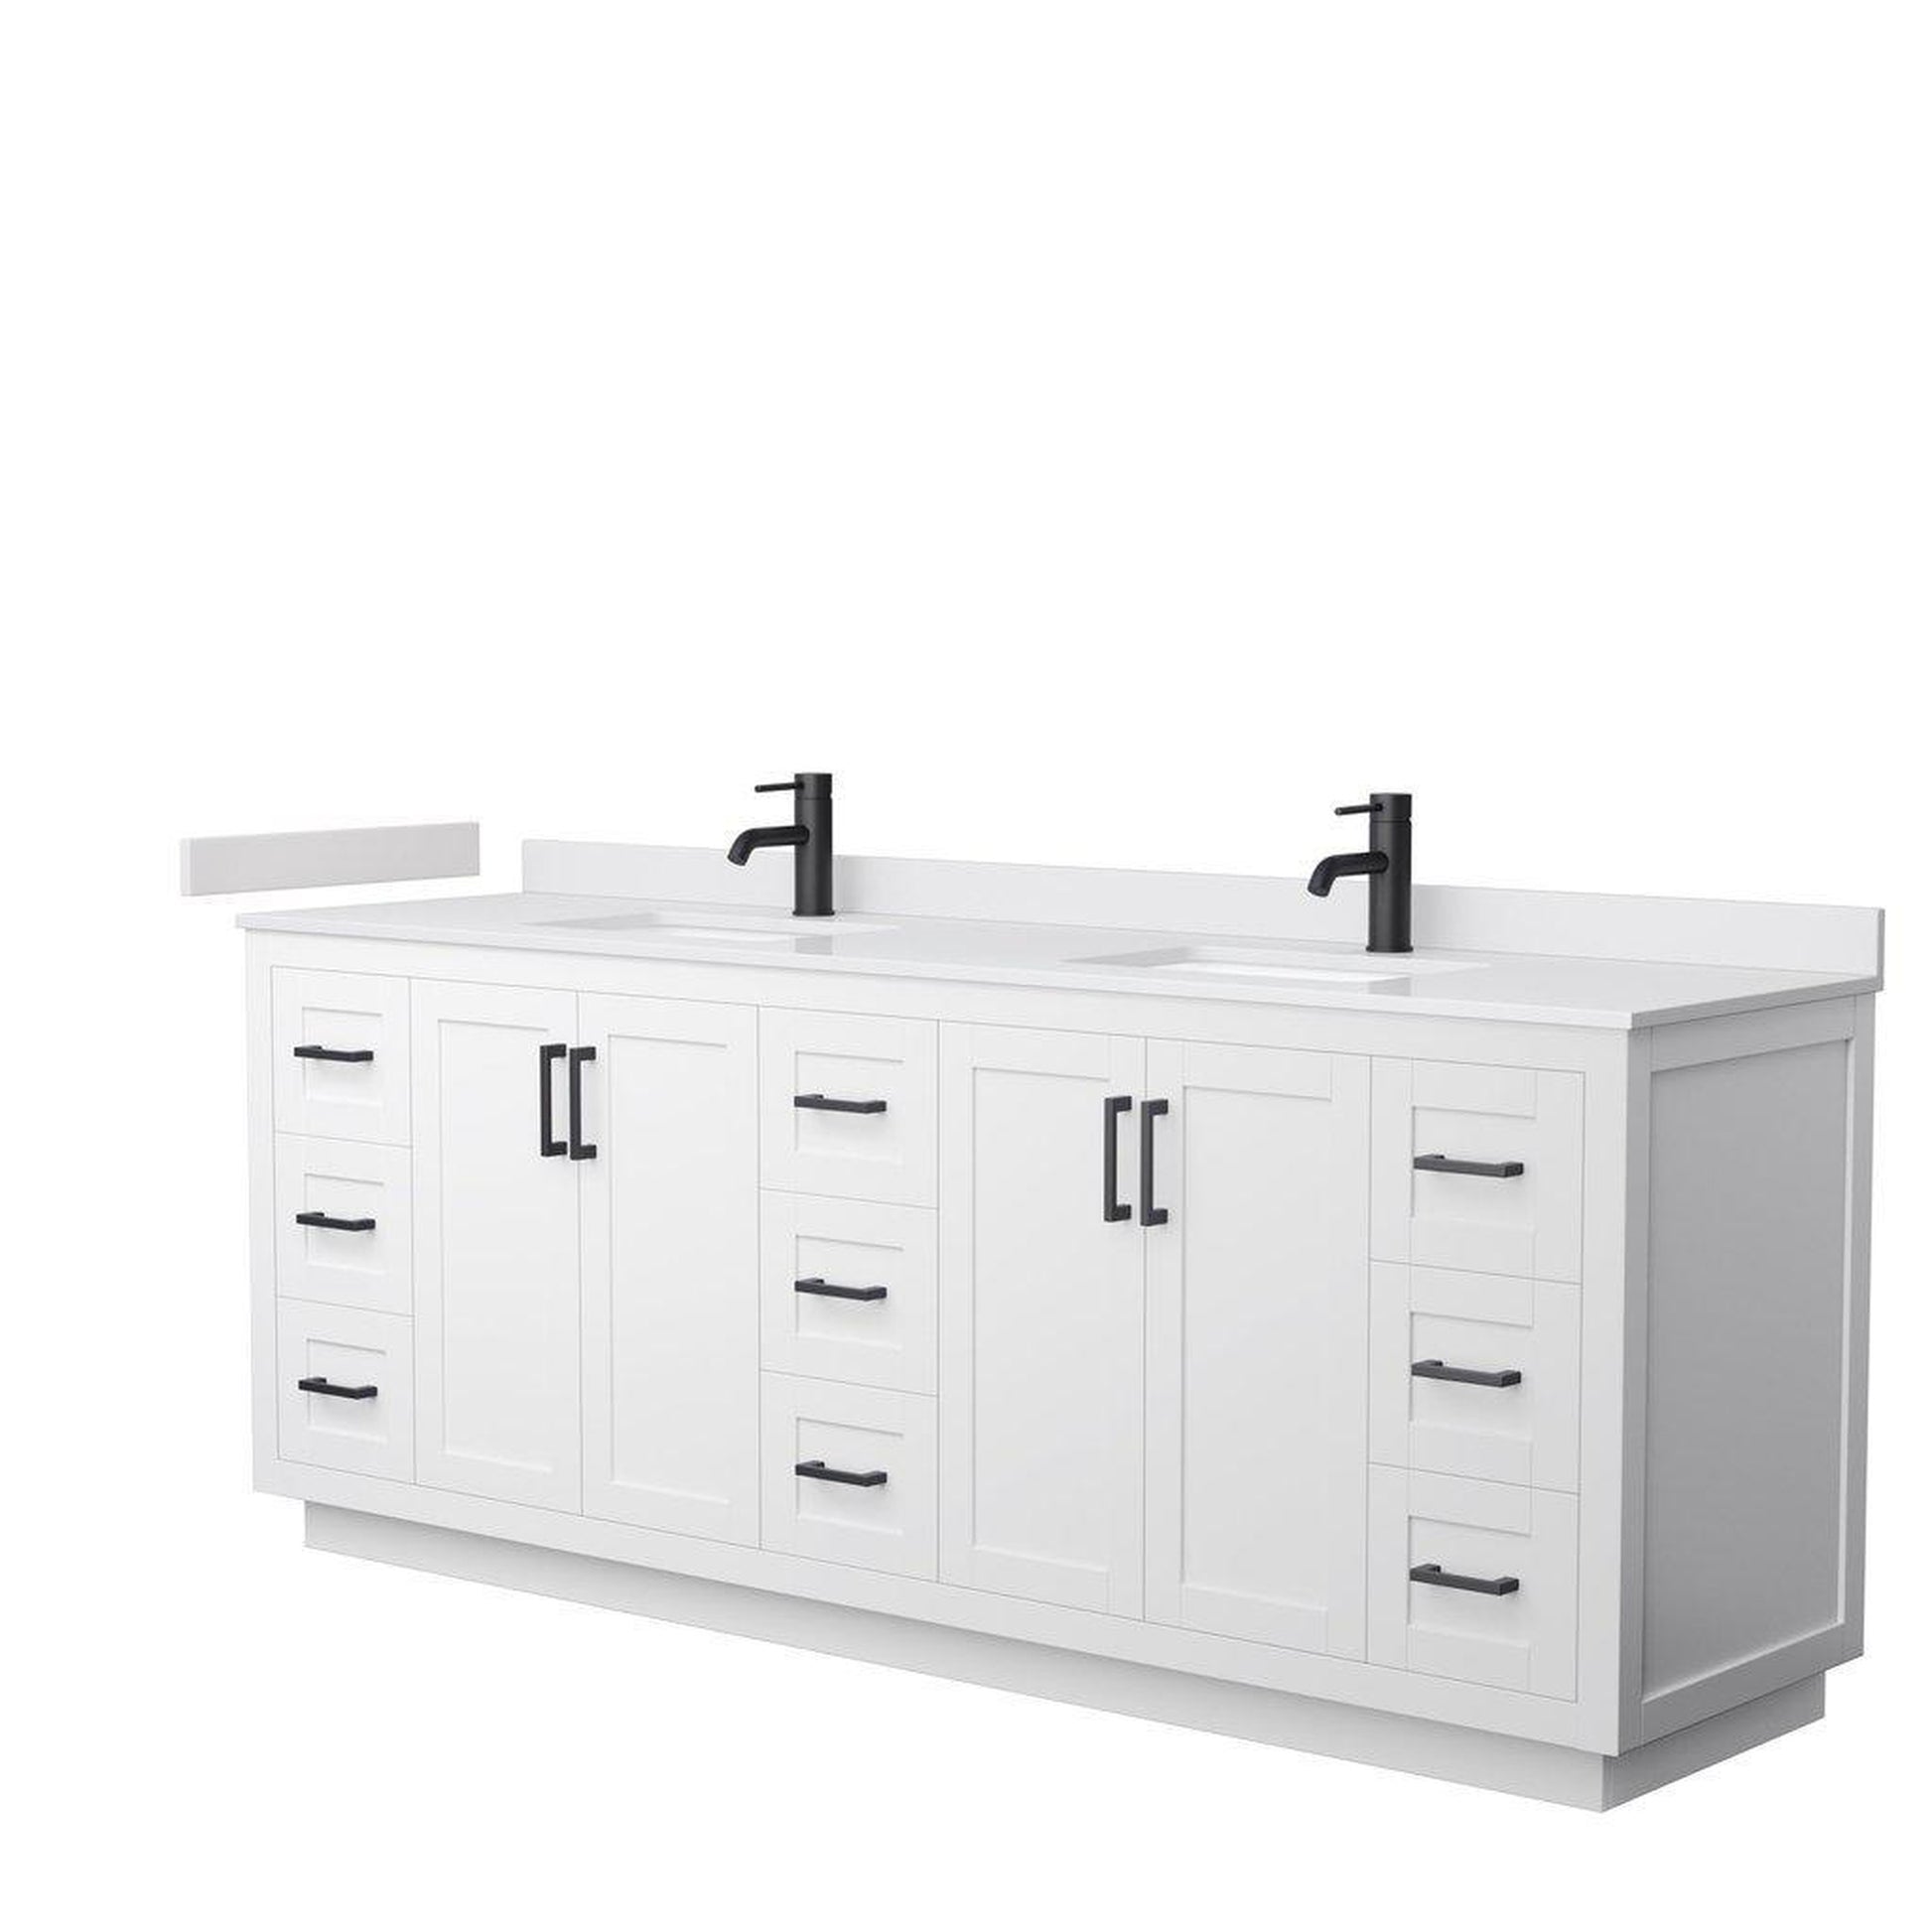 Wyndham Collection Miranda 84" Double Bathroom White Vanity Set With White Cultured Marble Countertop, Undermount Square Sink, And Matte Black Trim